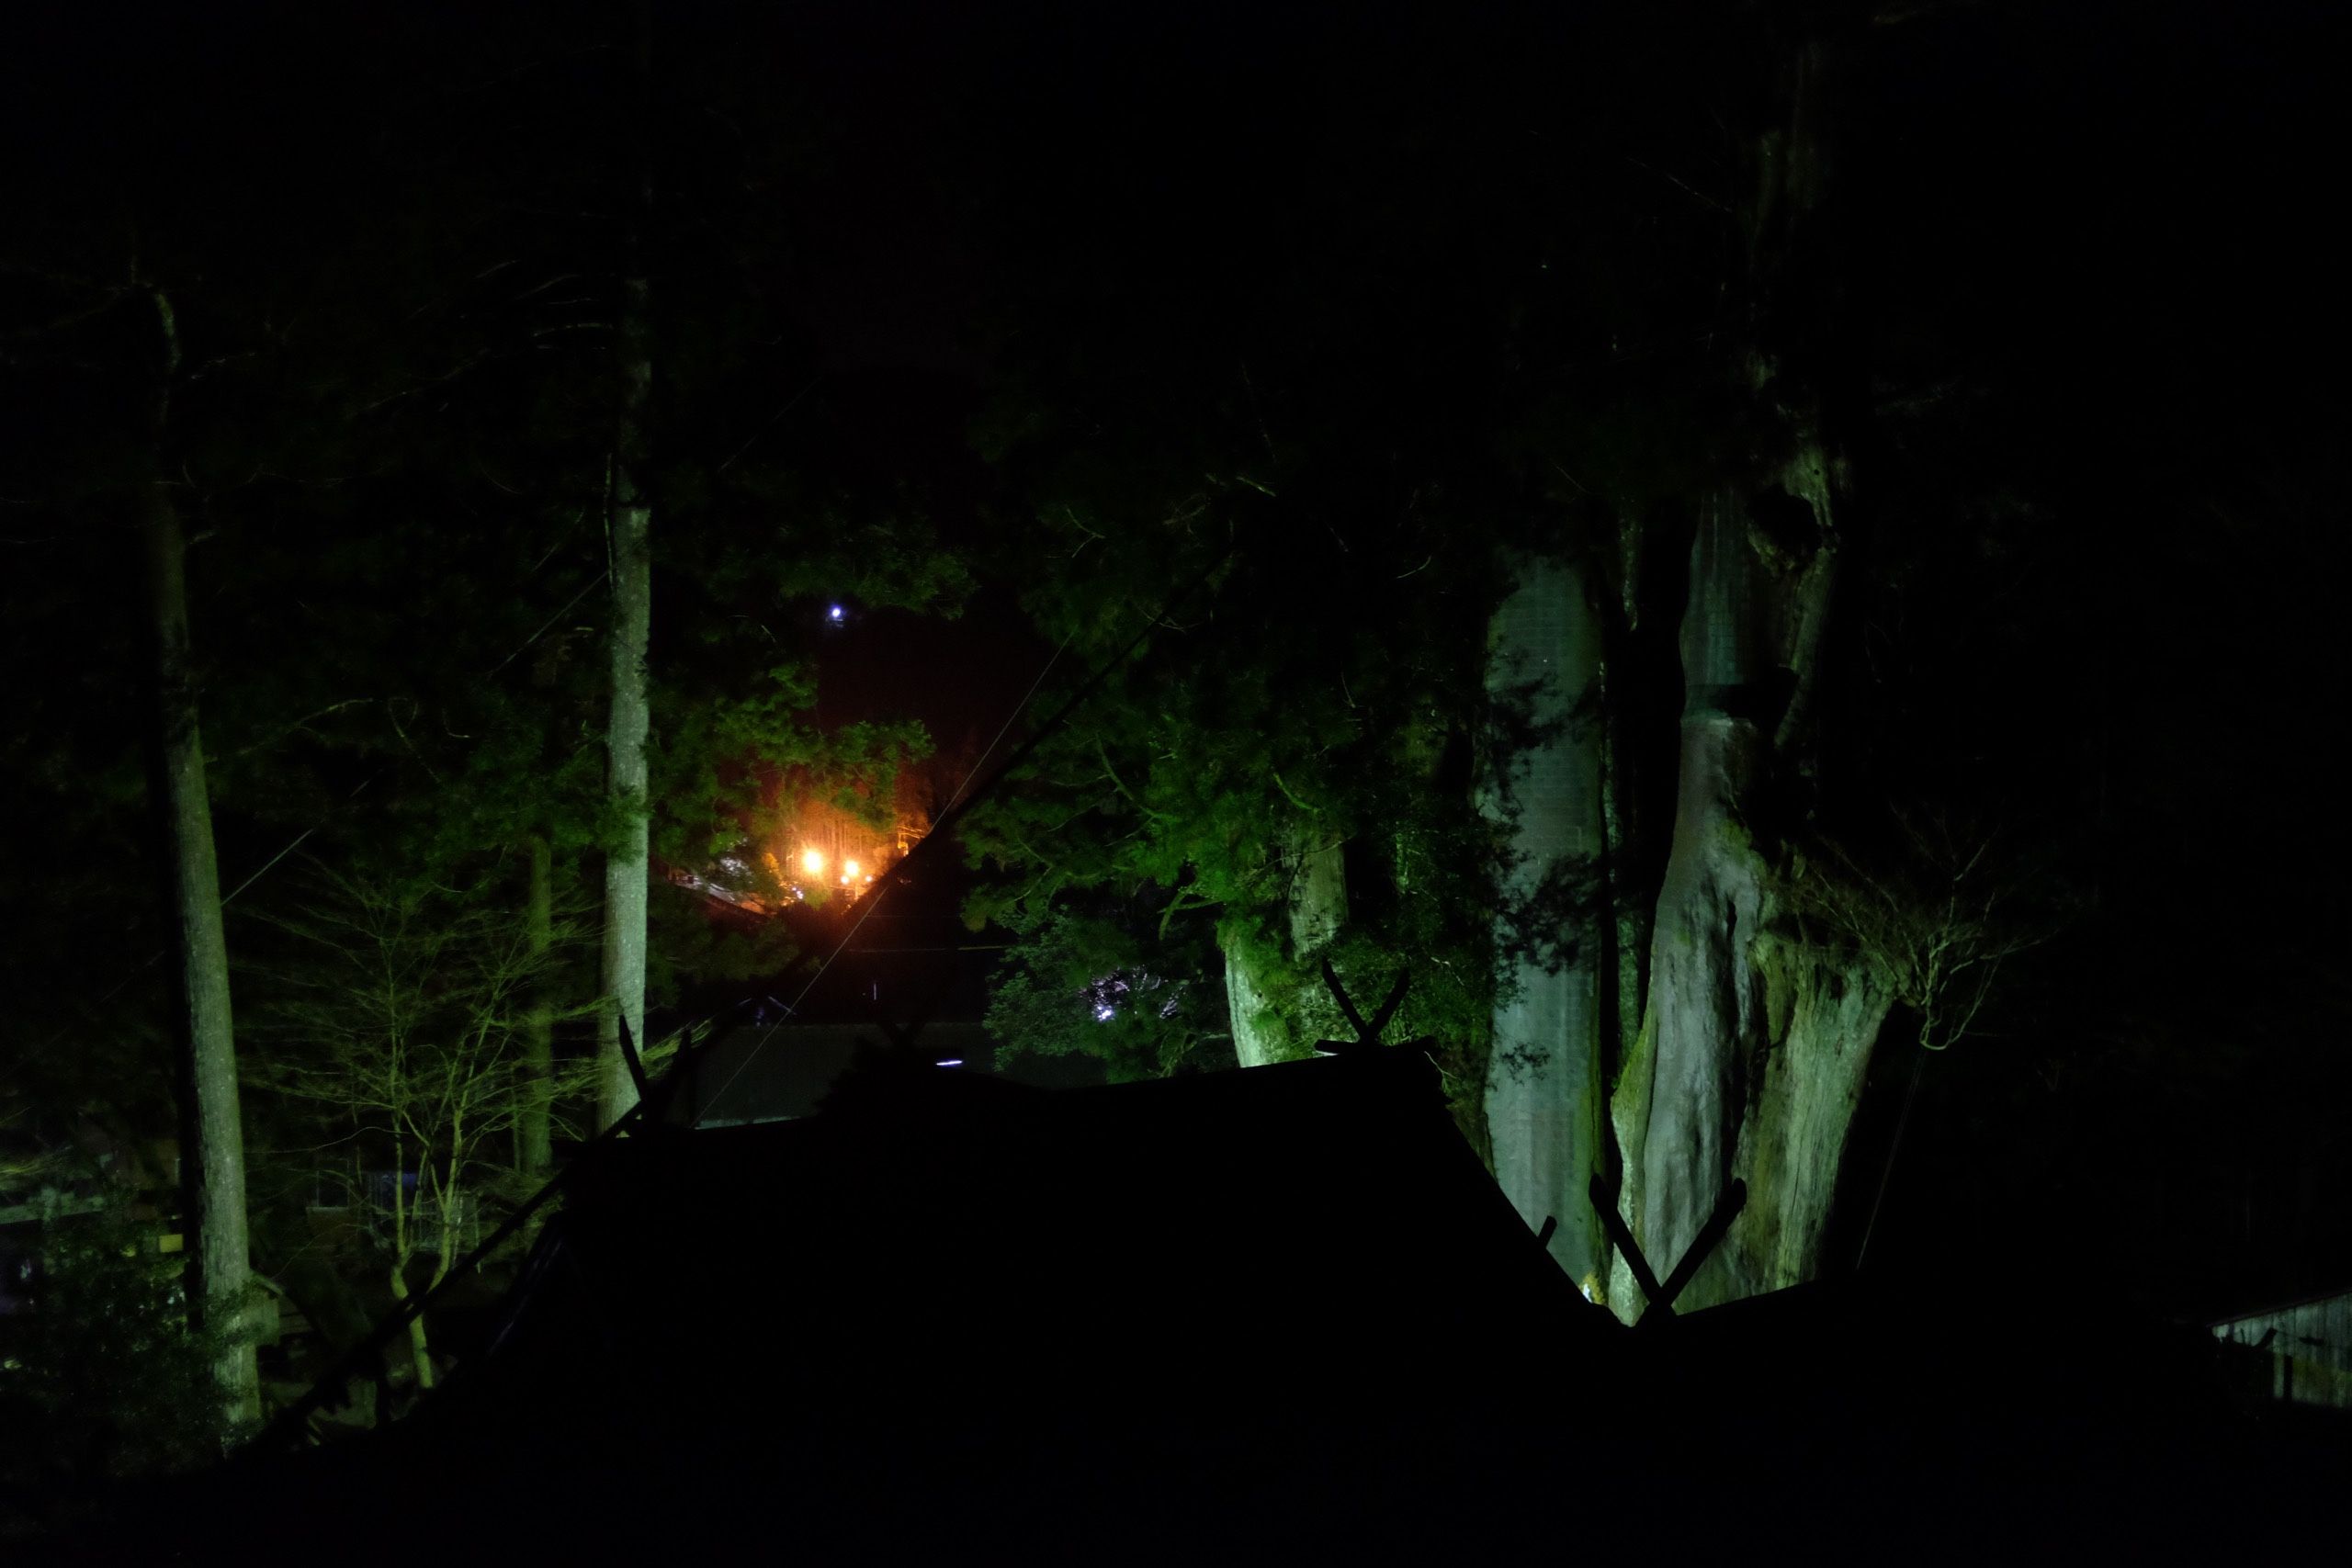 In the very dark night, the trunk of an enormous tree is visible next to what appears to be the roof of a Japanese shrine.